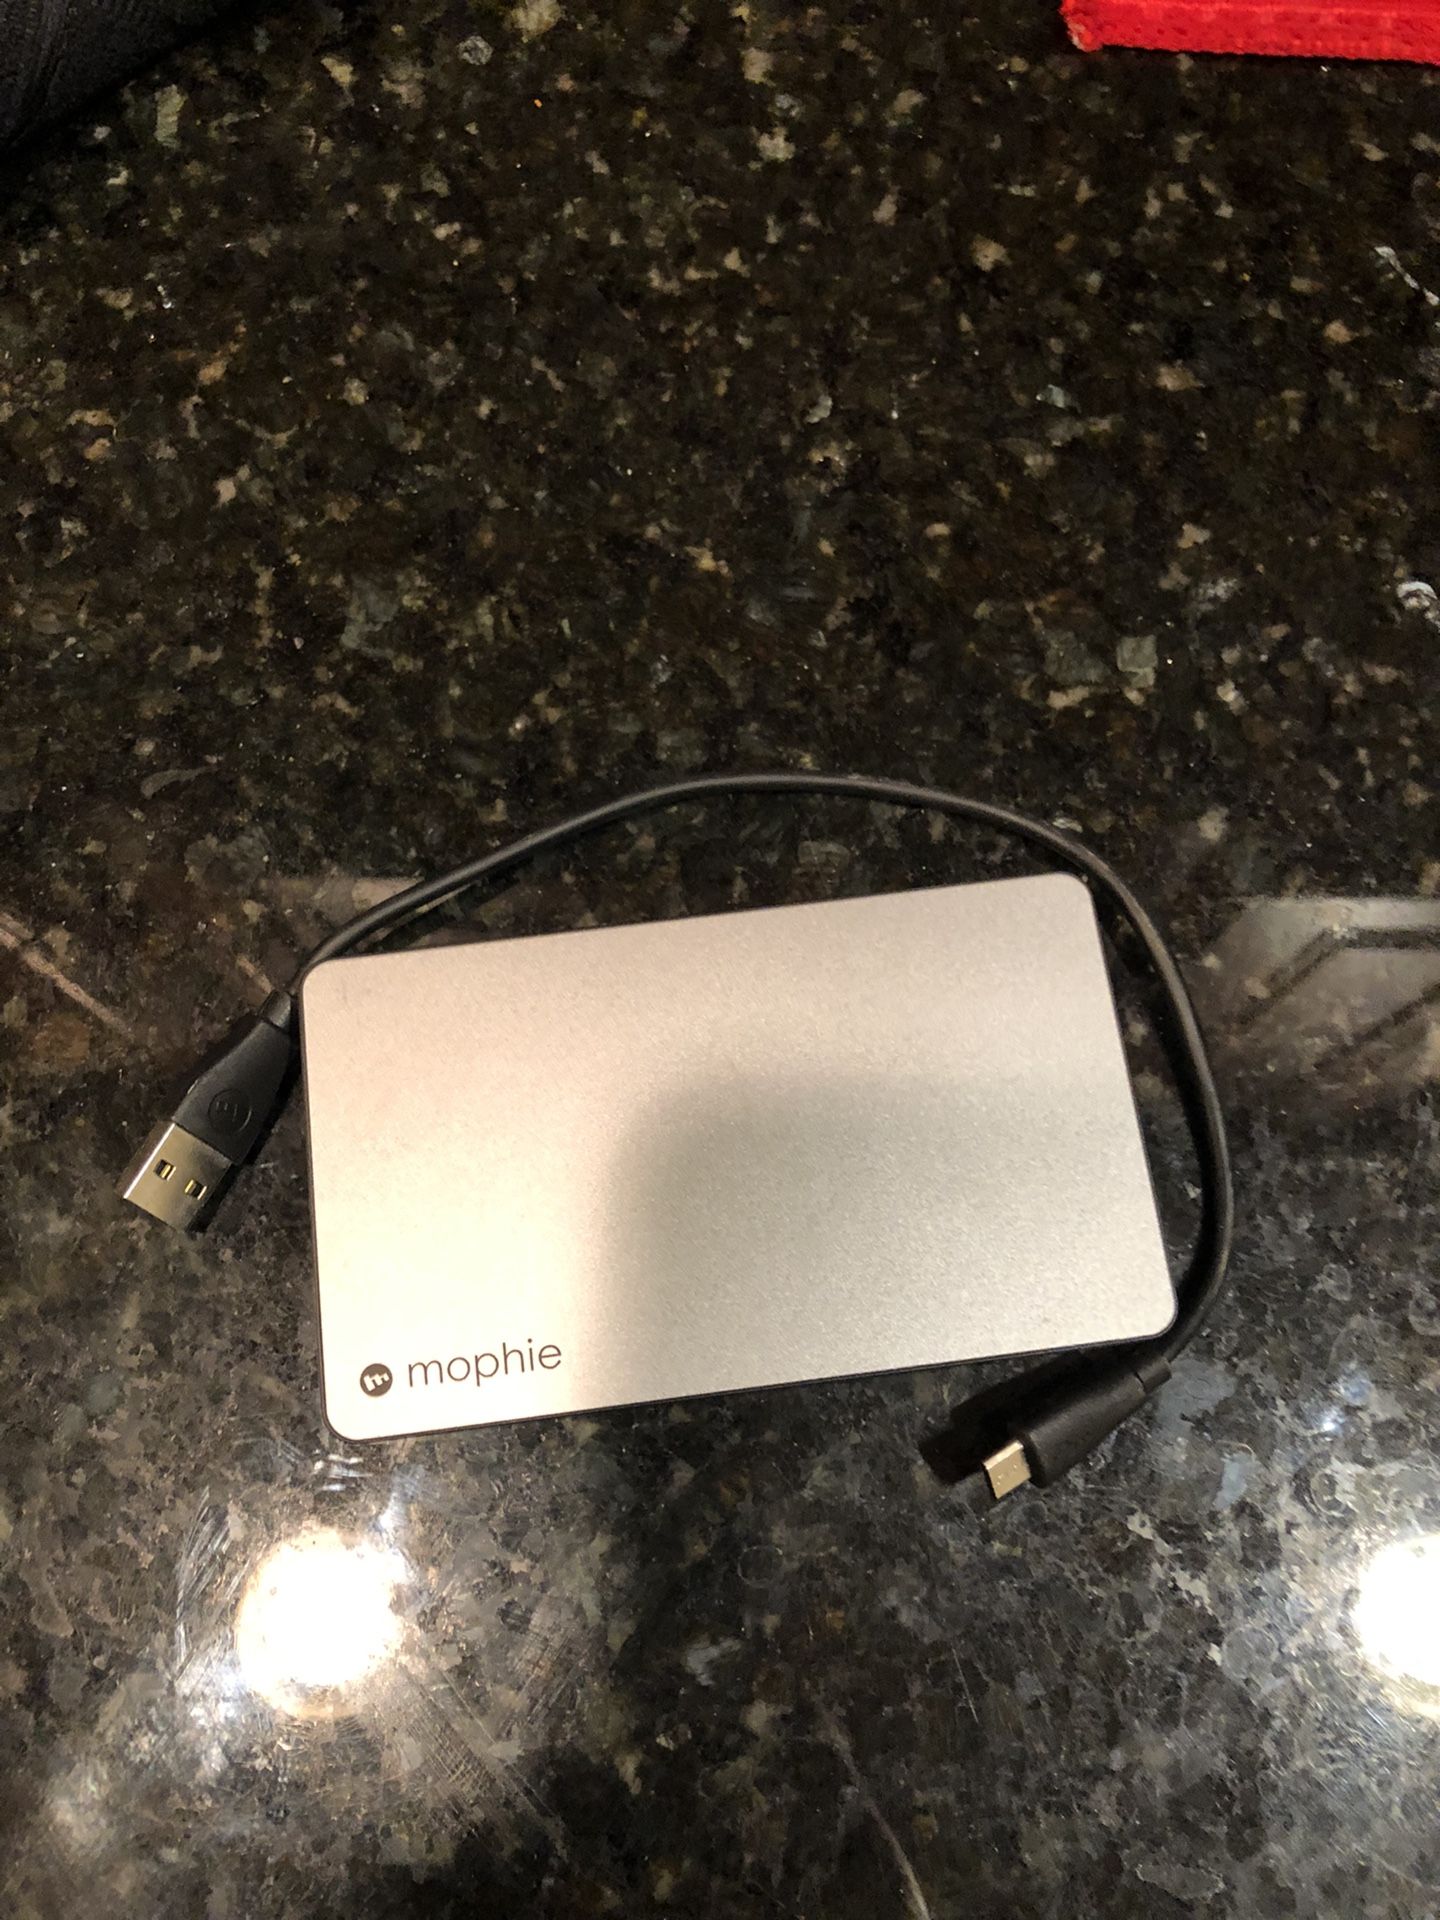 Mophie Powerbank Charger